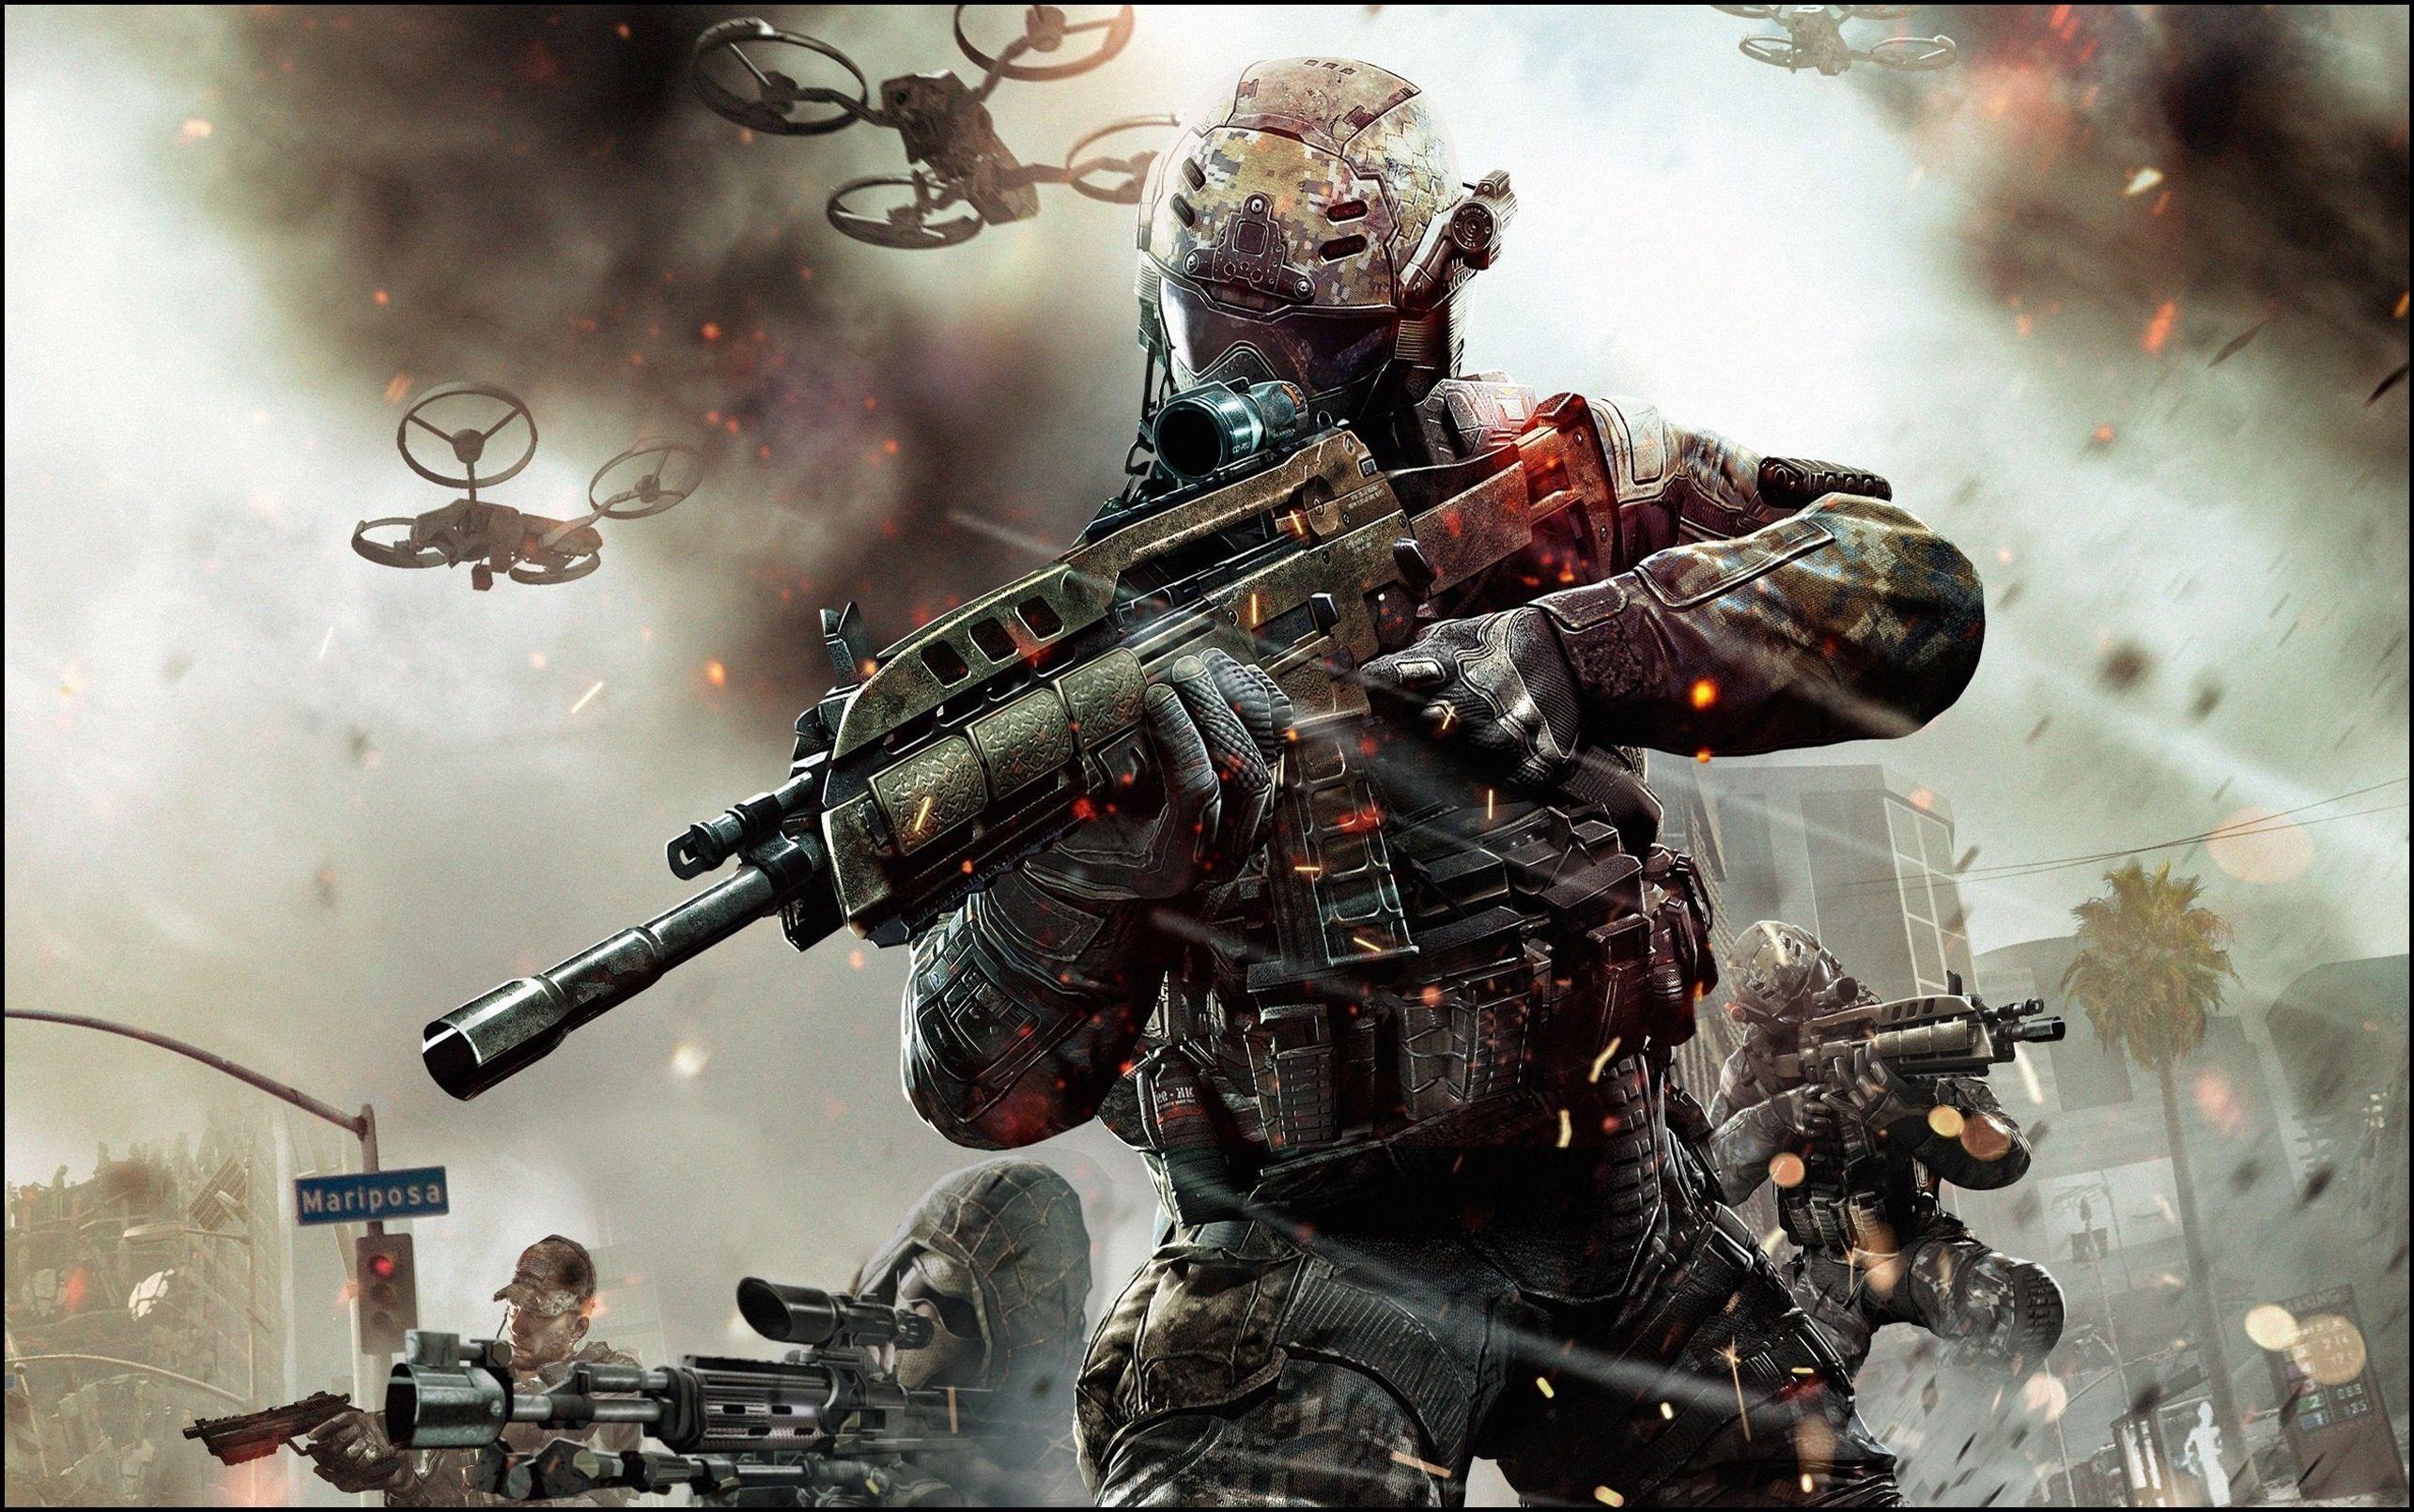 Call of Duty: Black Ops 3 HD wallpaper free download